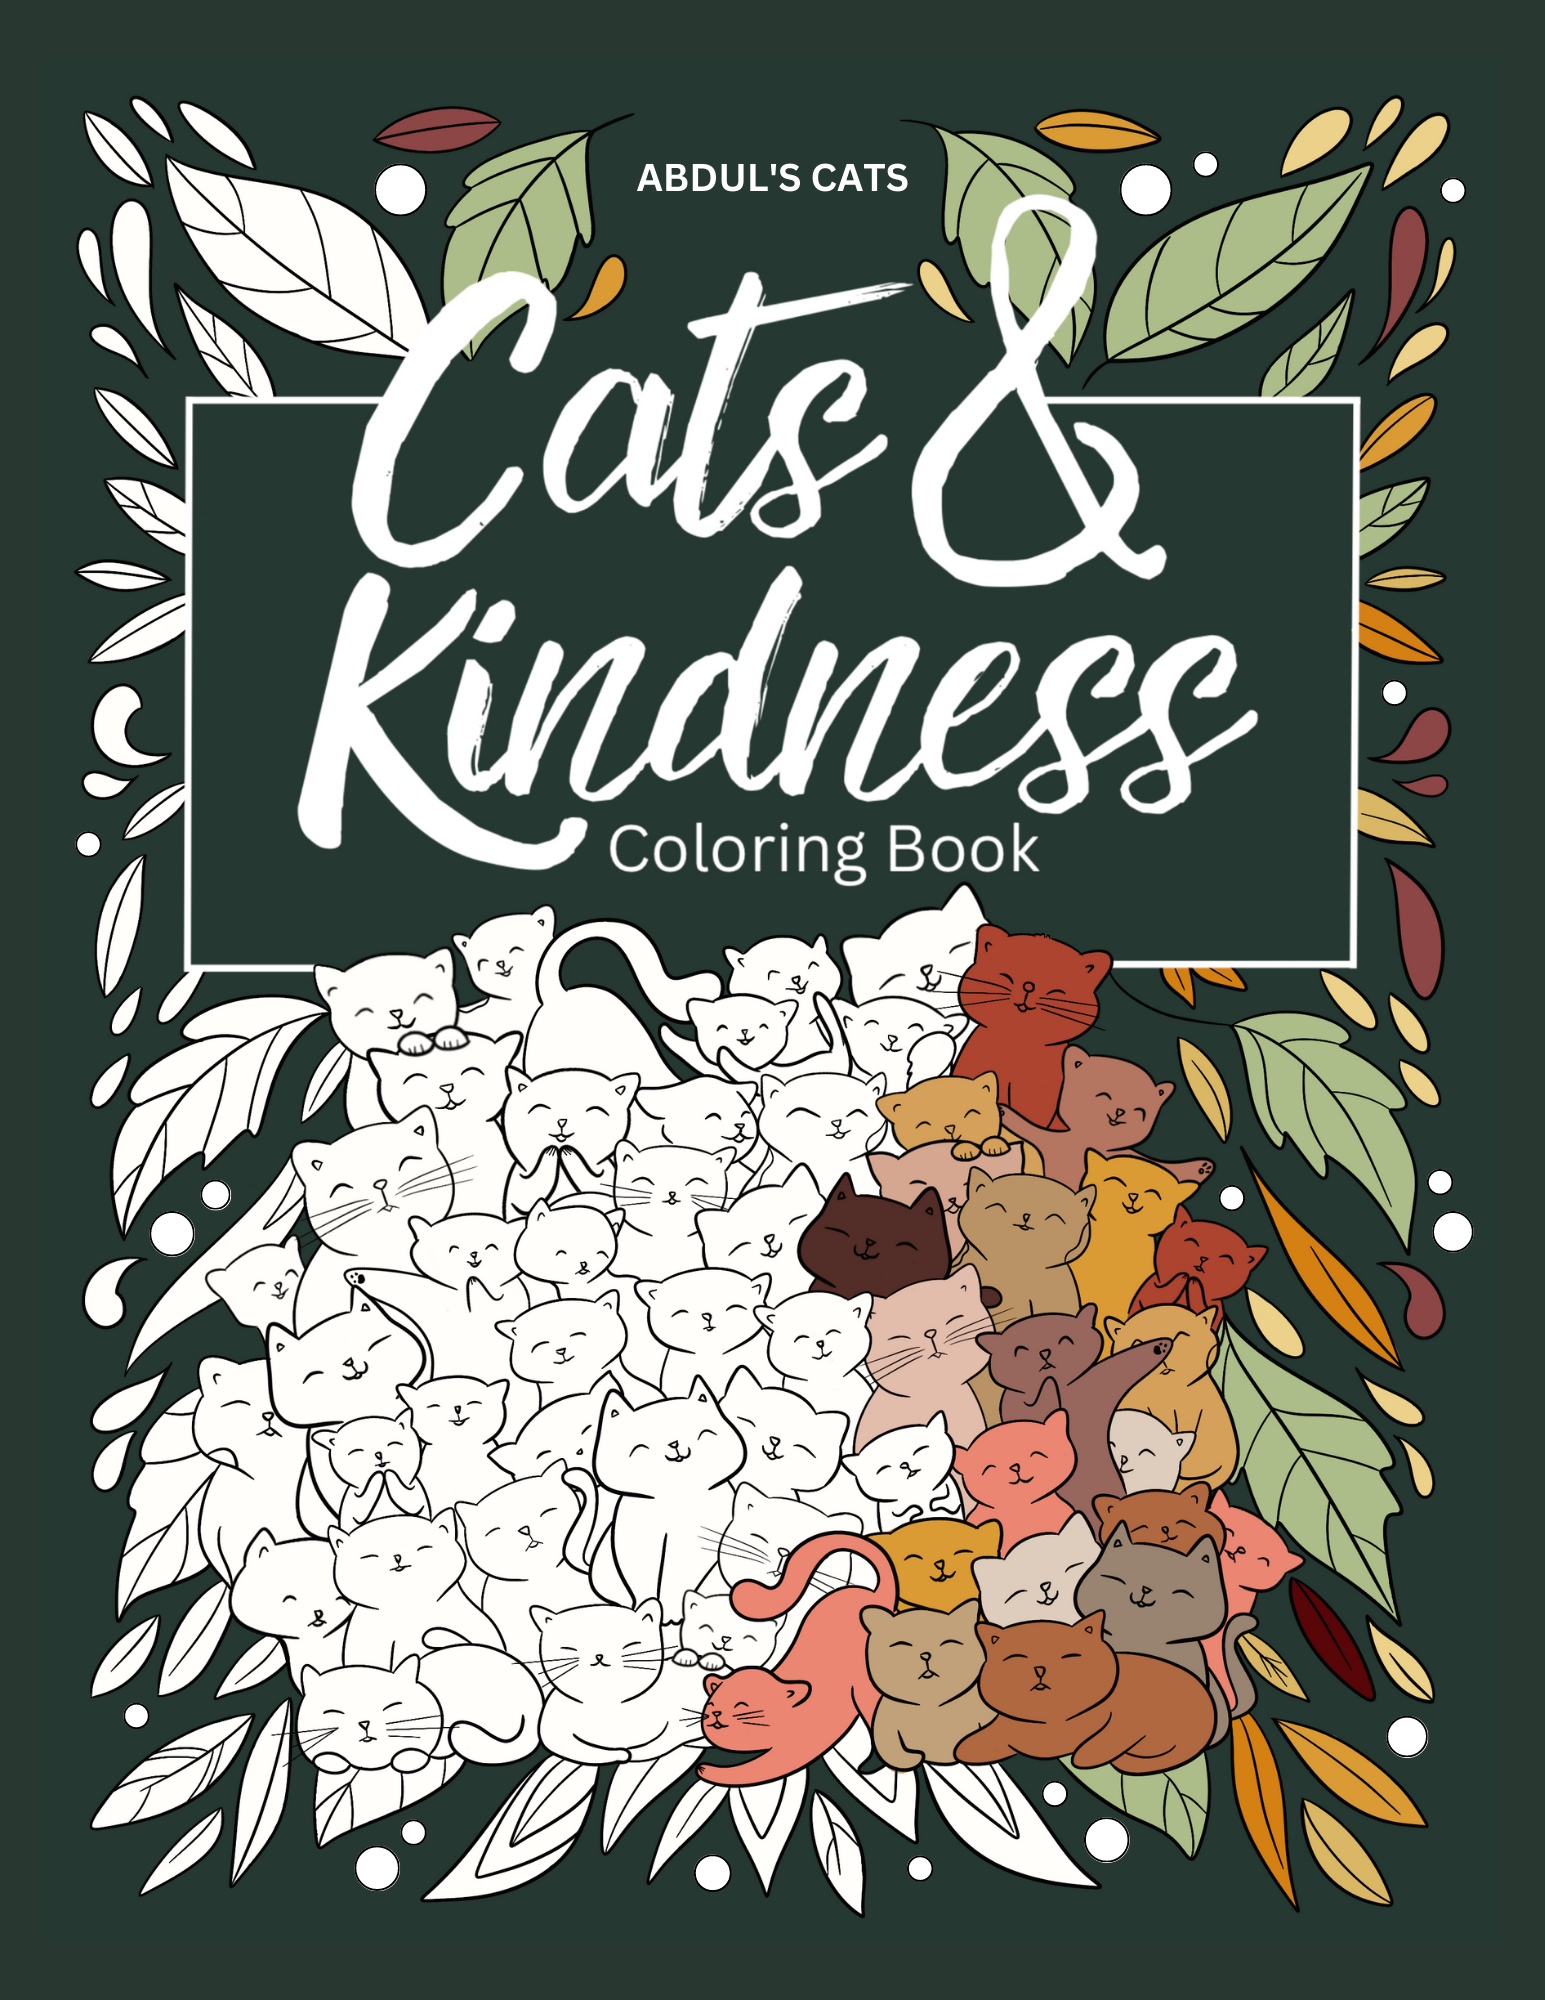 Large Print Cat Coloring Book for Adults: Stress Relief and Relaxation for Kitten and Cat Lovers